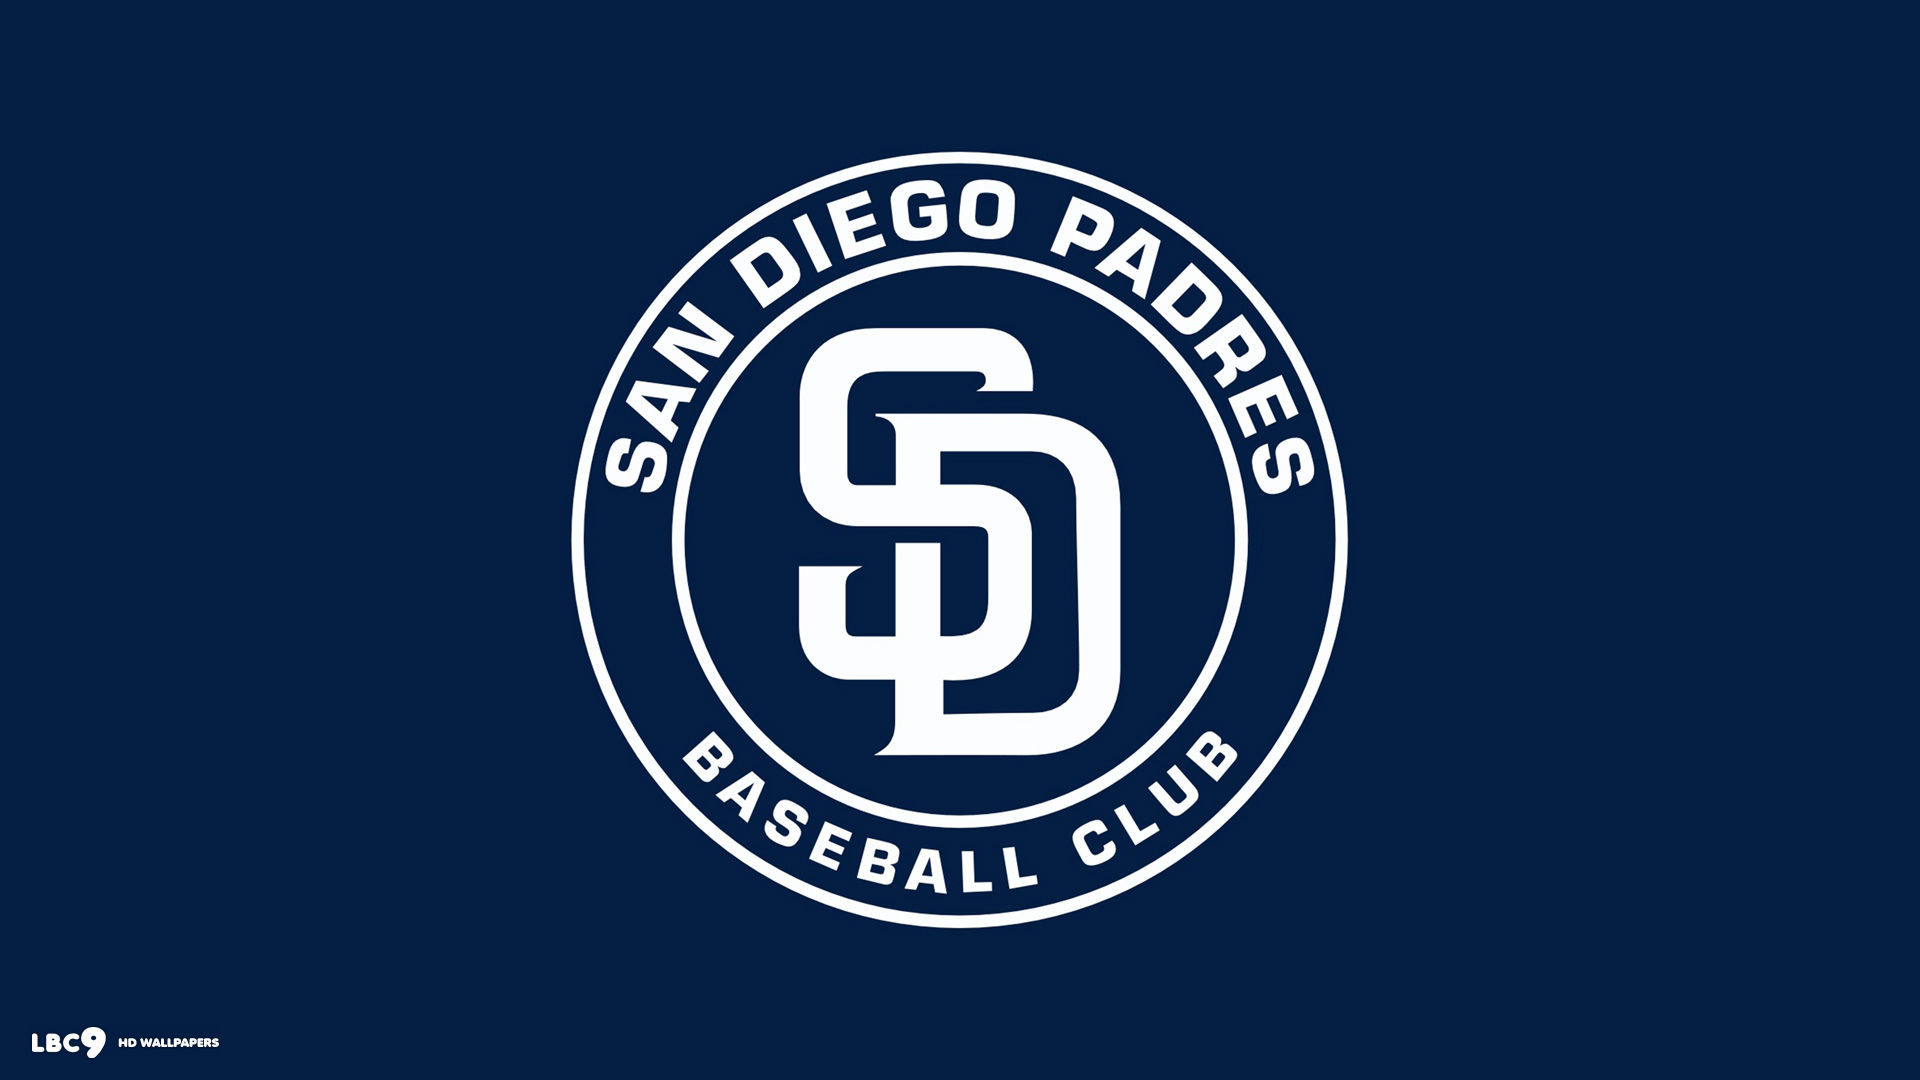 Padres Hd Background 1920x1080